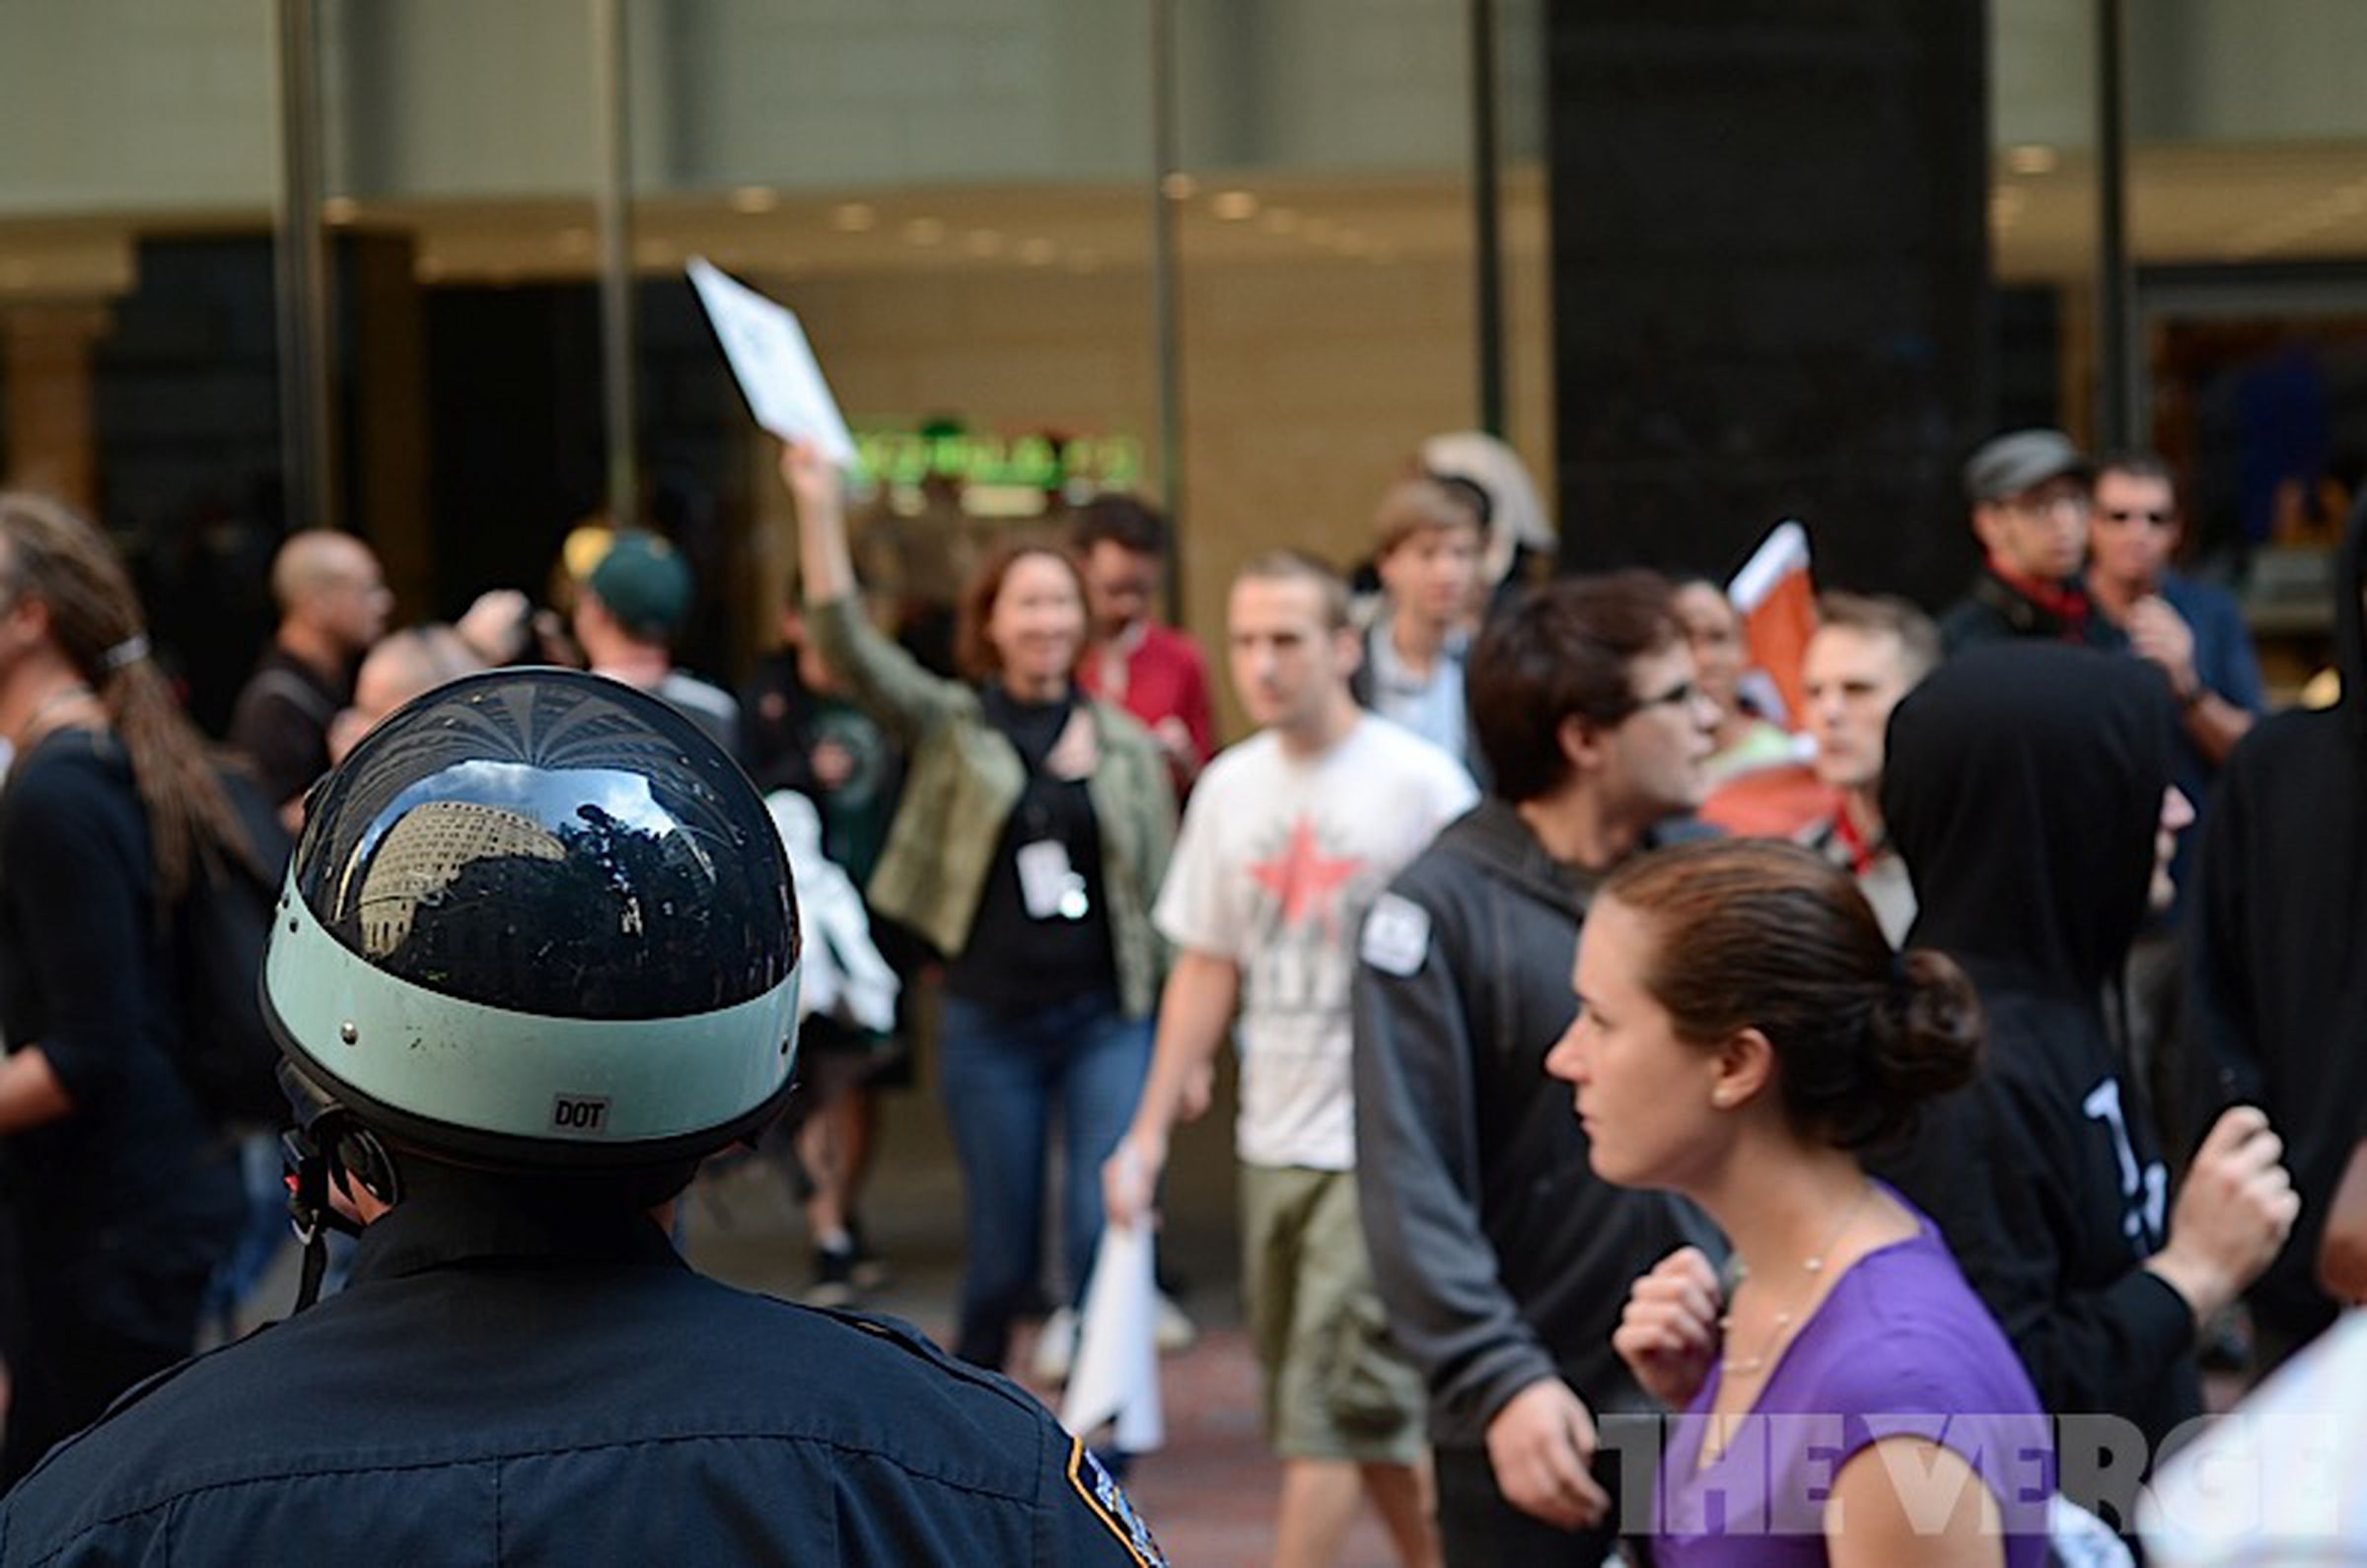 Occupy Wall Street's one year anniversary